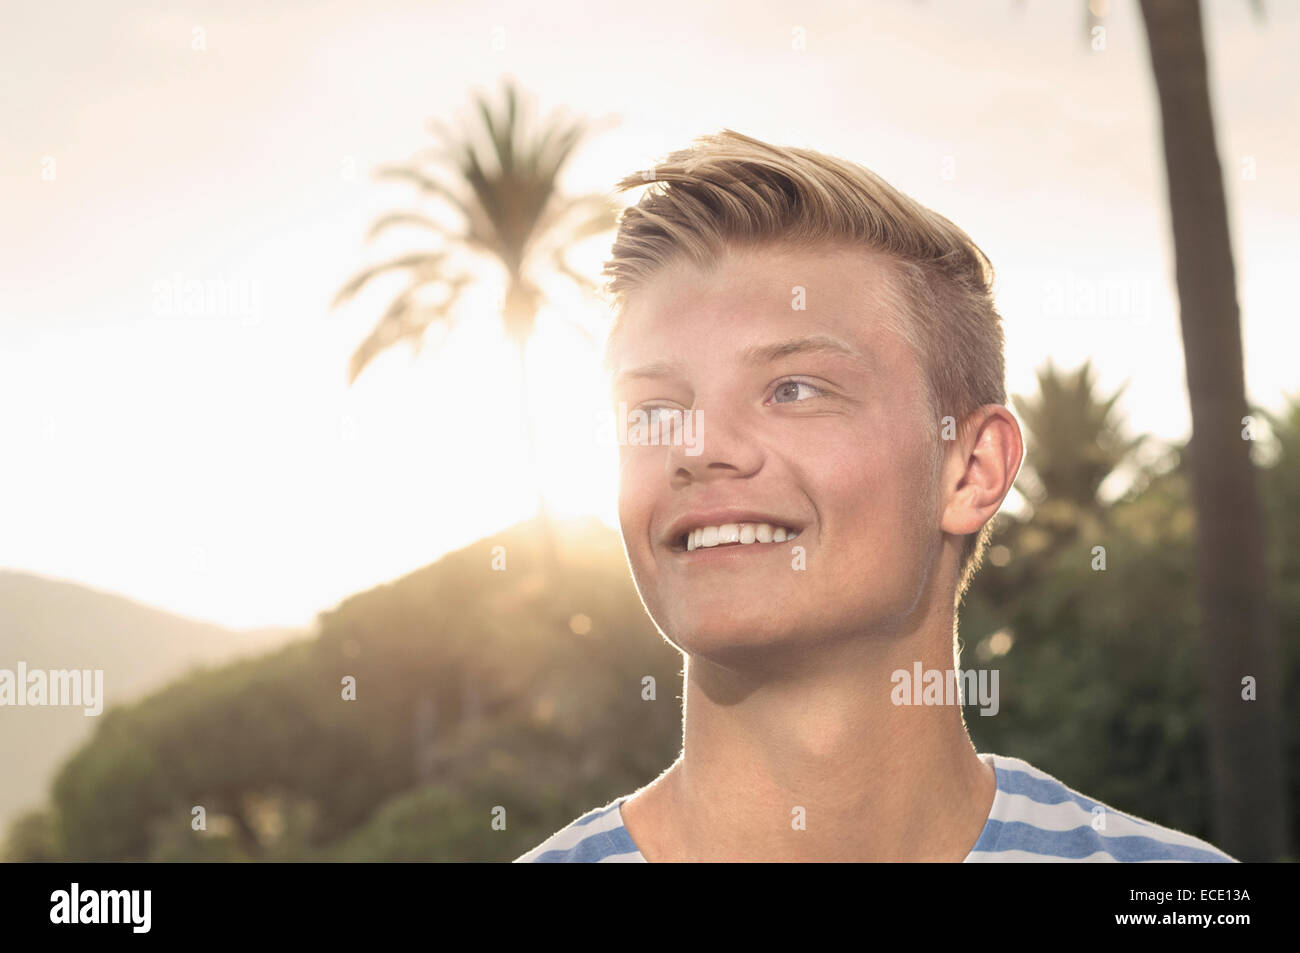 Sunset portrait young teenager smiling holiday Stock Photo